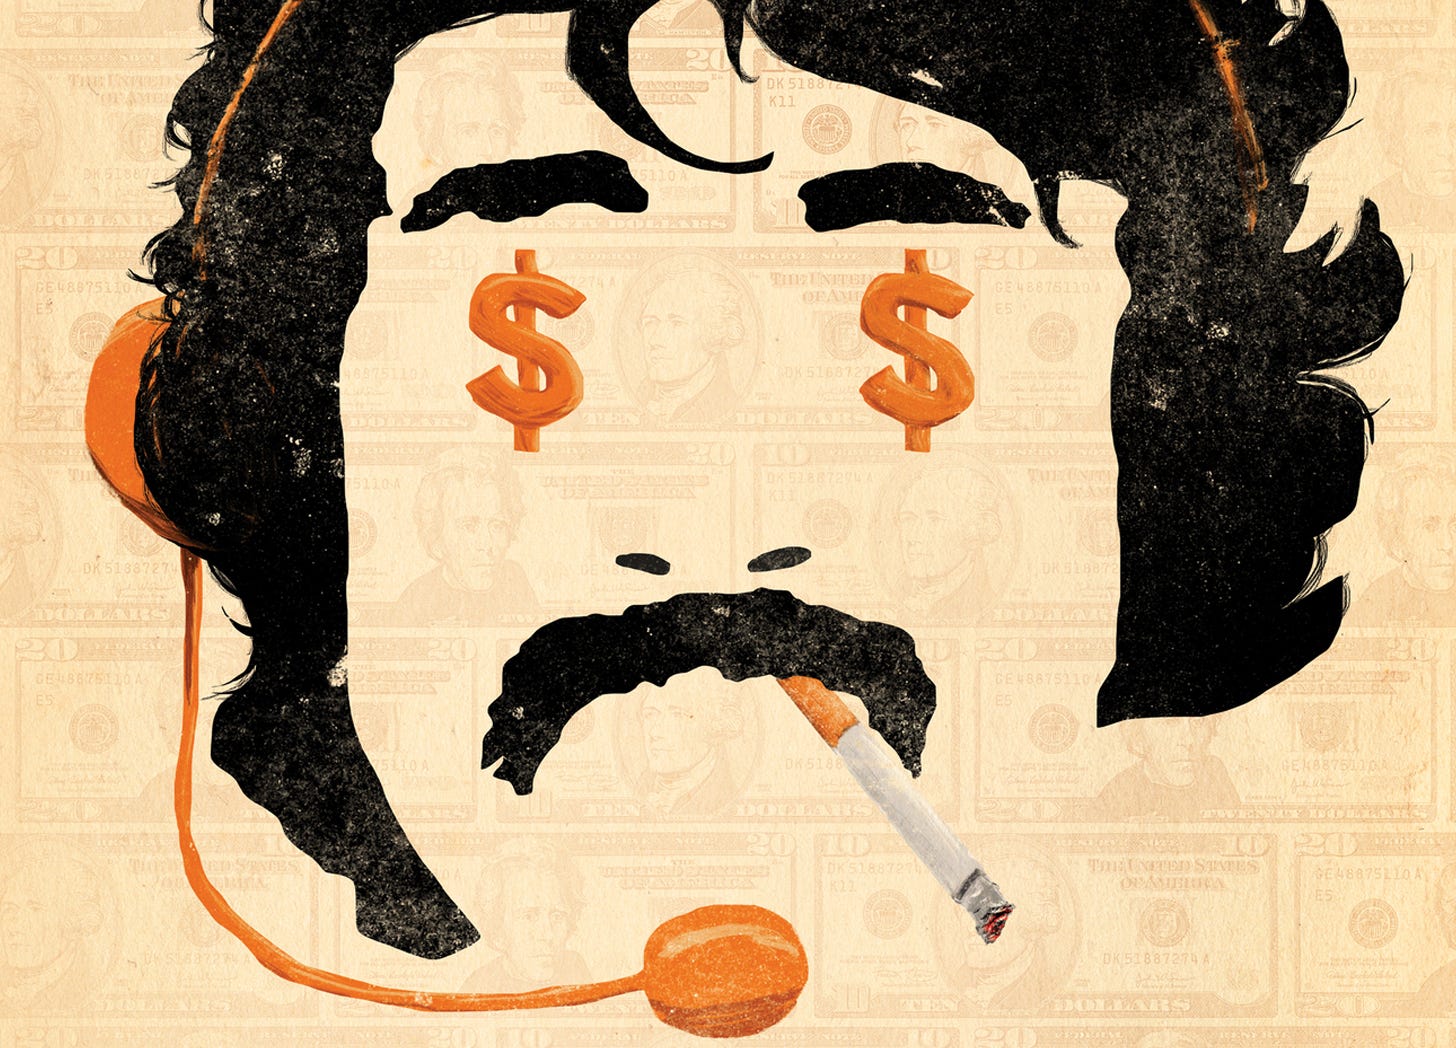 Over a light yellow background of US currency, an illustration of a man with a mustache with dollar signs for eyes and a cigarette hanging out of his mouth. He’s wearing headphones and a microphone that telemarketers wear. 